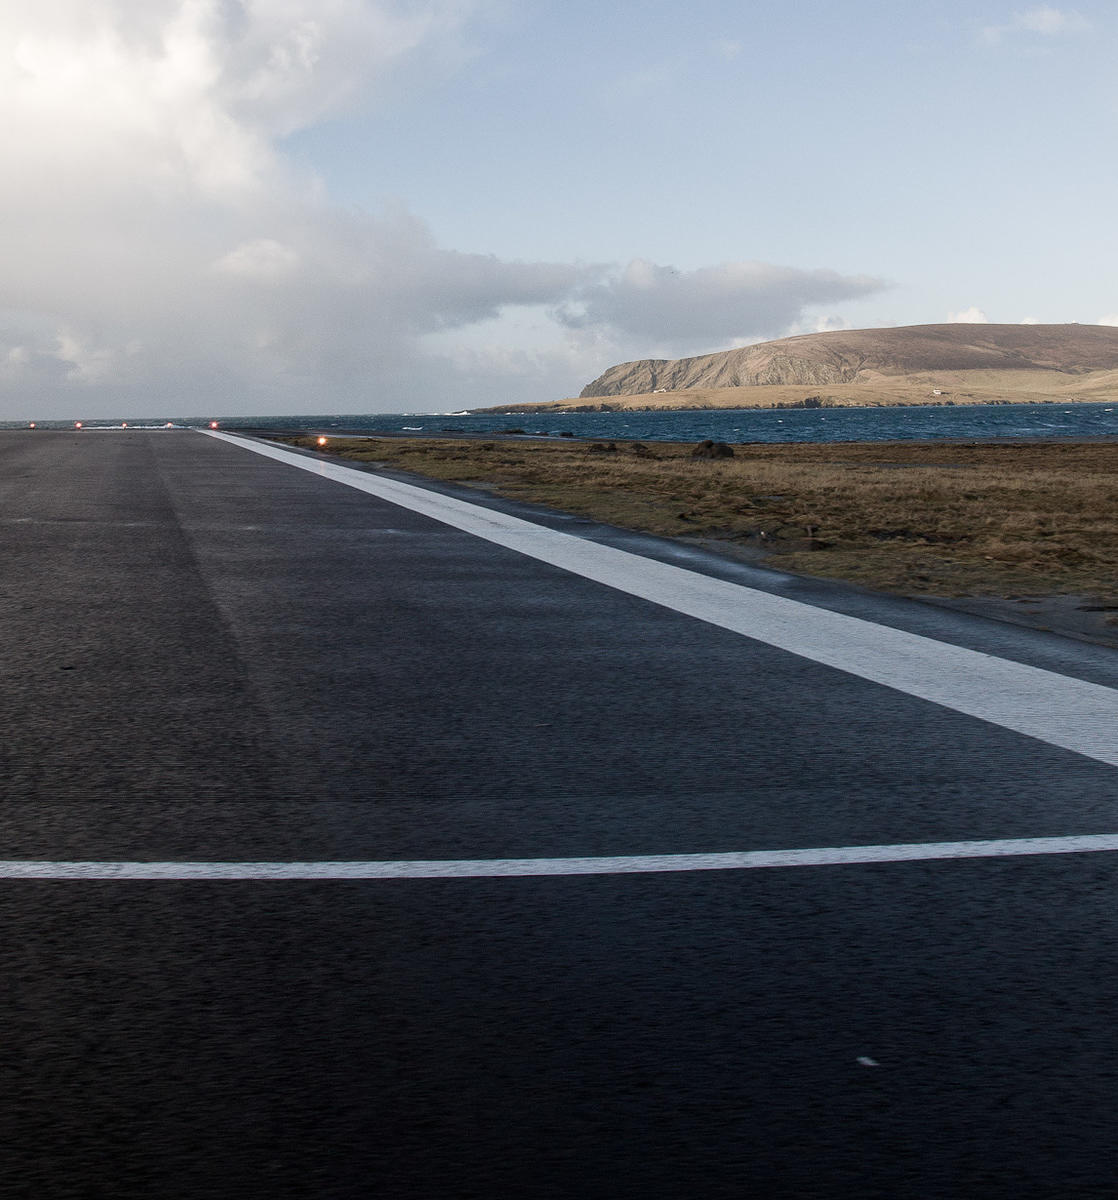 Driving over Sumburgh airfield